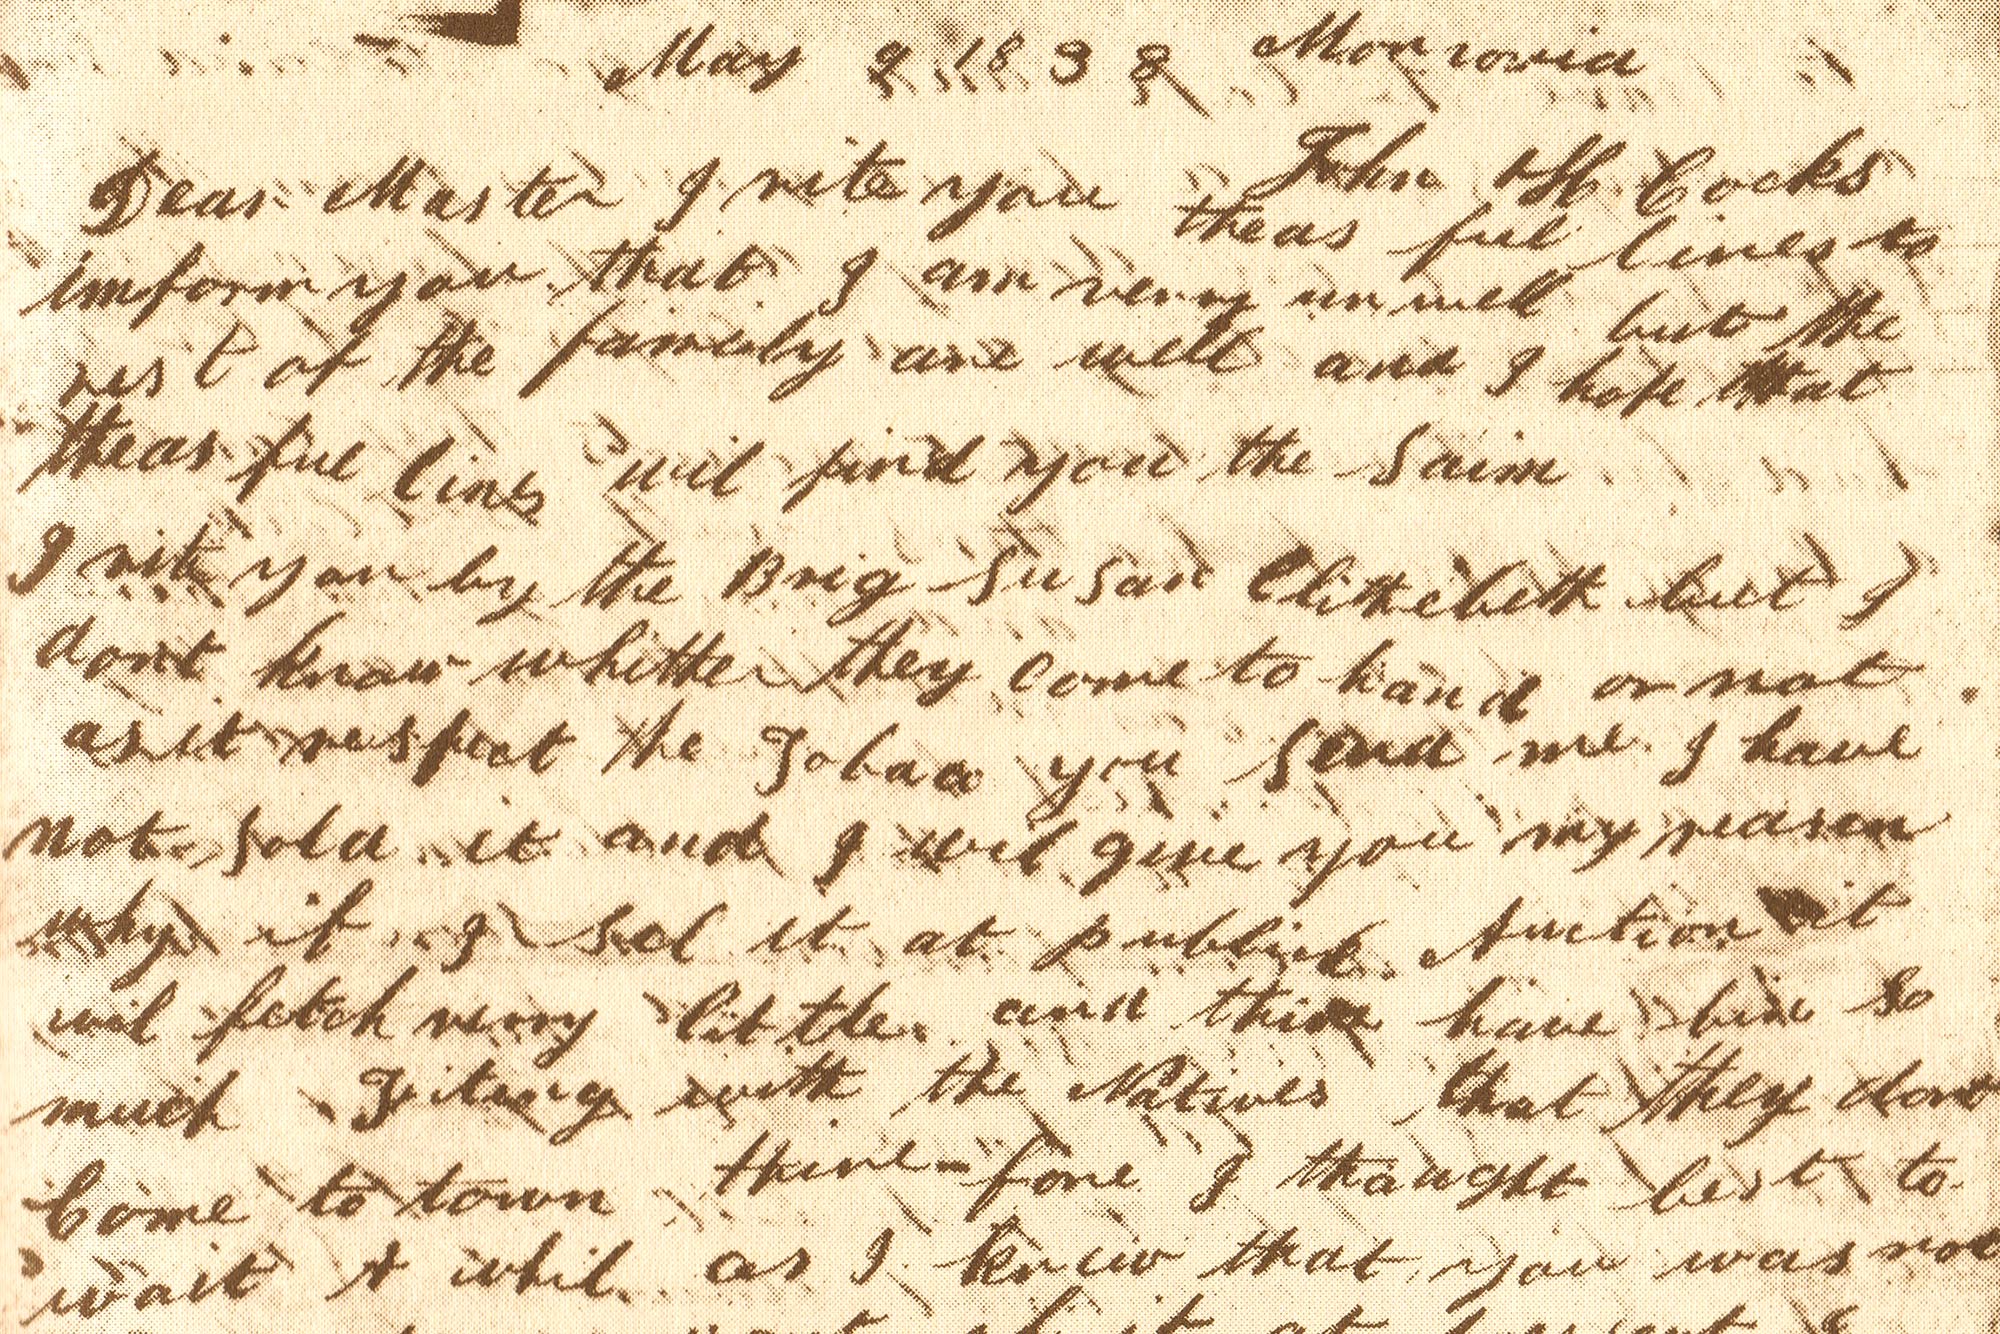 After Peyton Skipwith and his family moved to Liberia in 1835, they wrote more than 50 letters to their former owner, John Hartwell Cocke, discussing the family’s health and the difficulties of creating a new life in Africa.